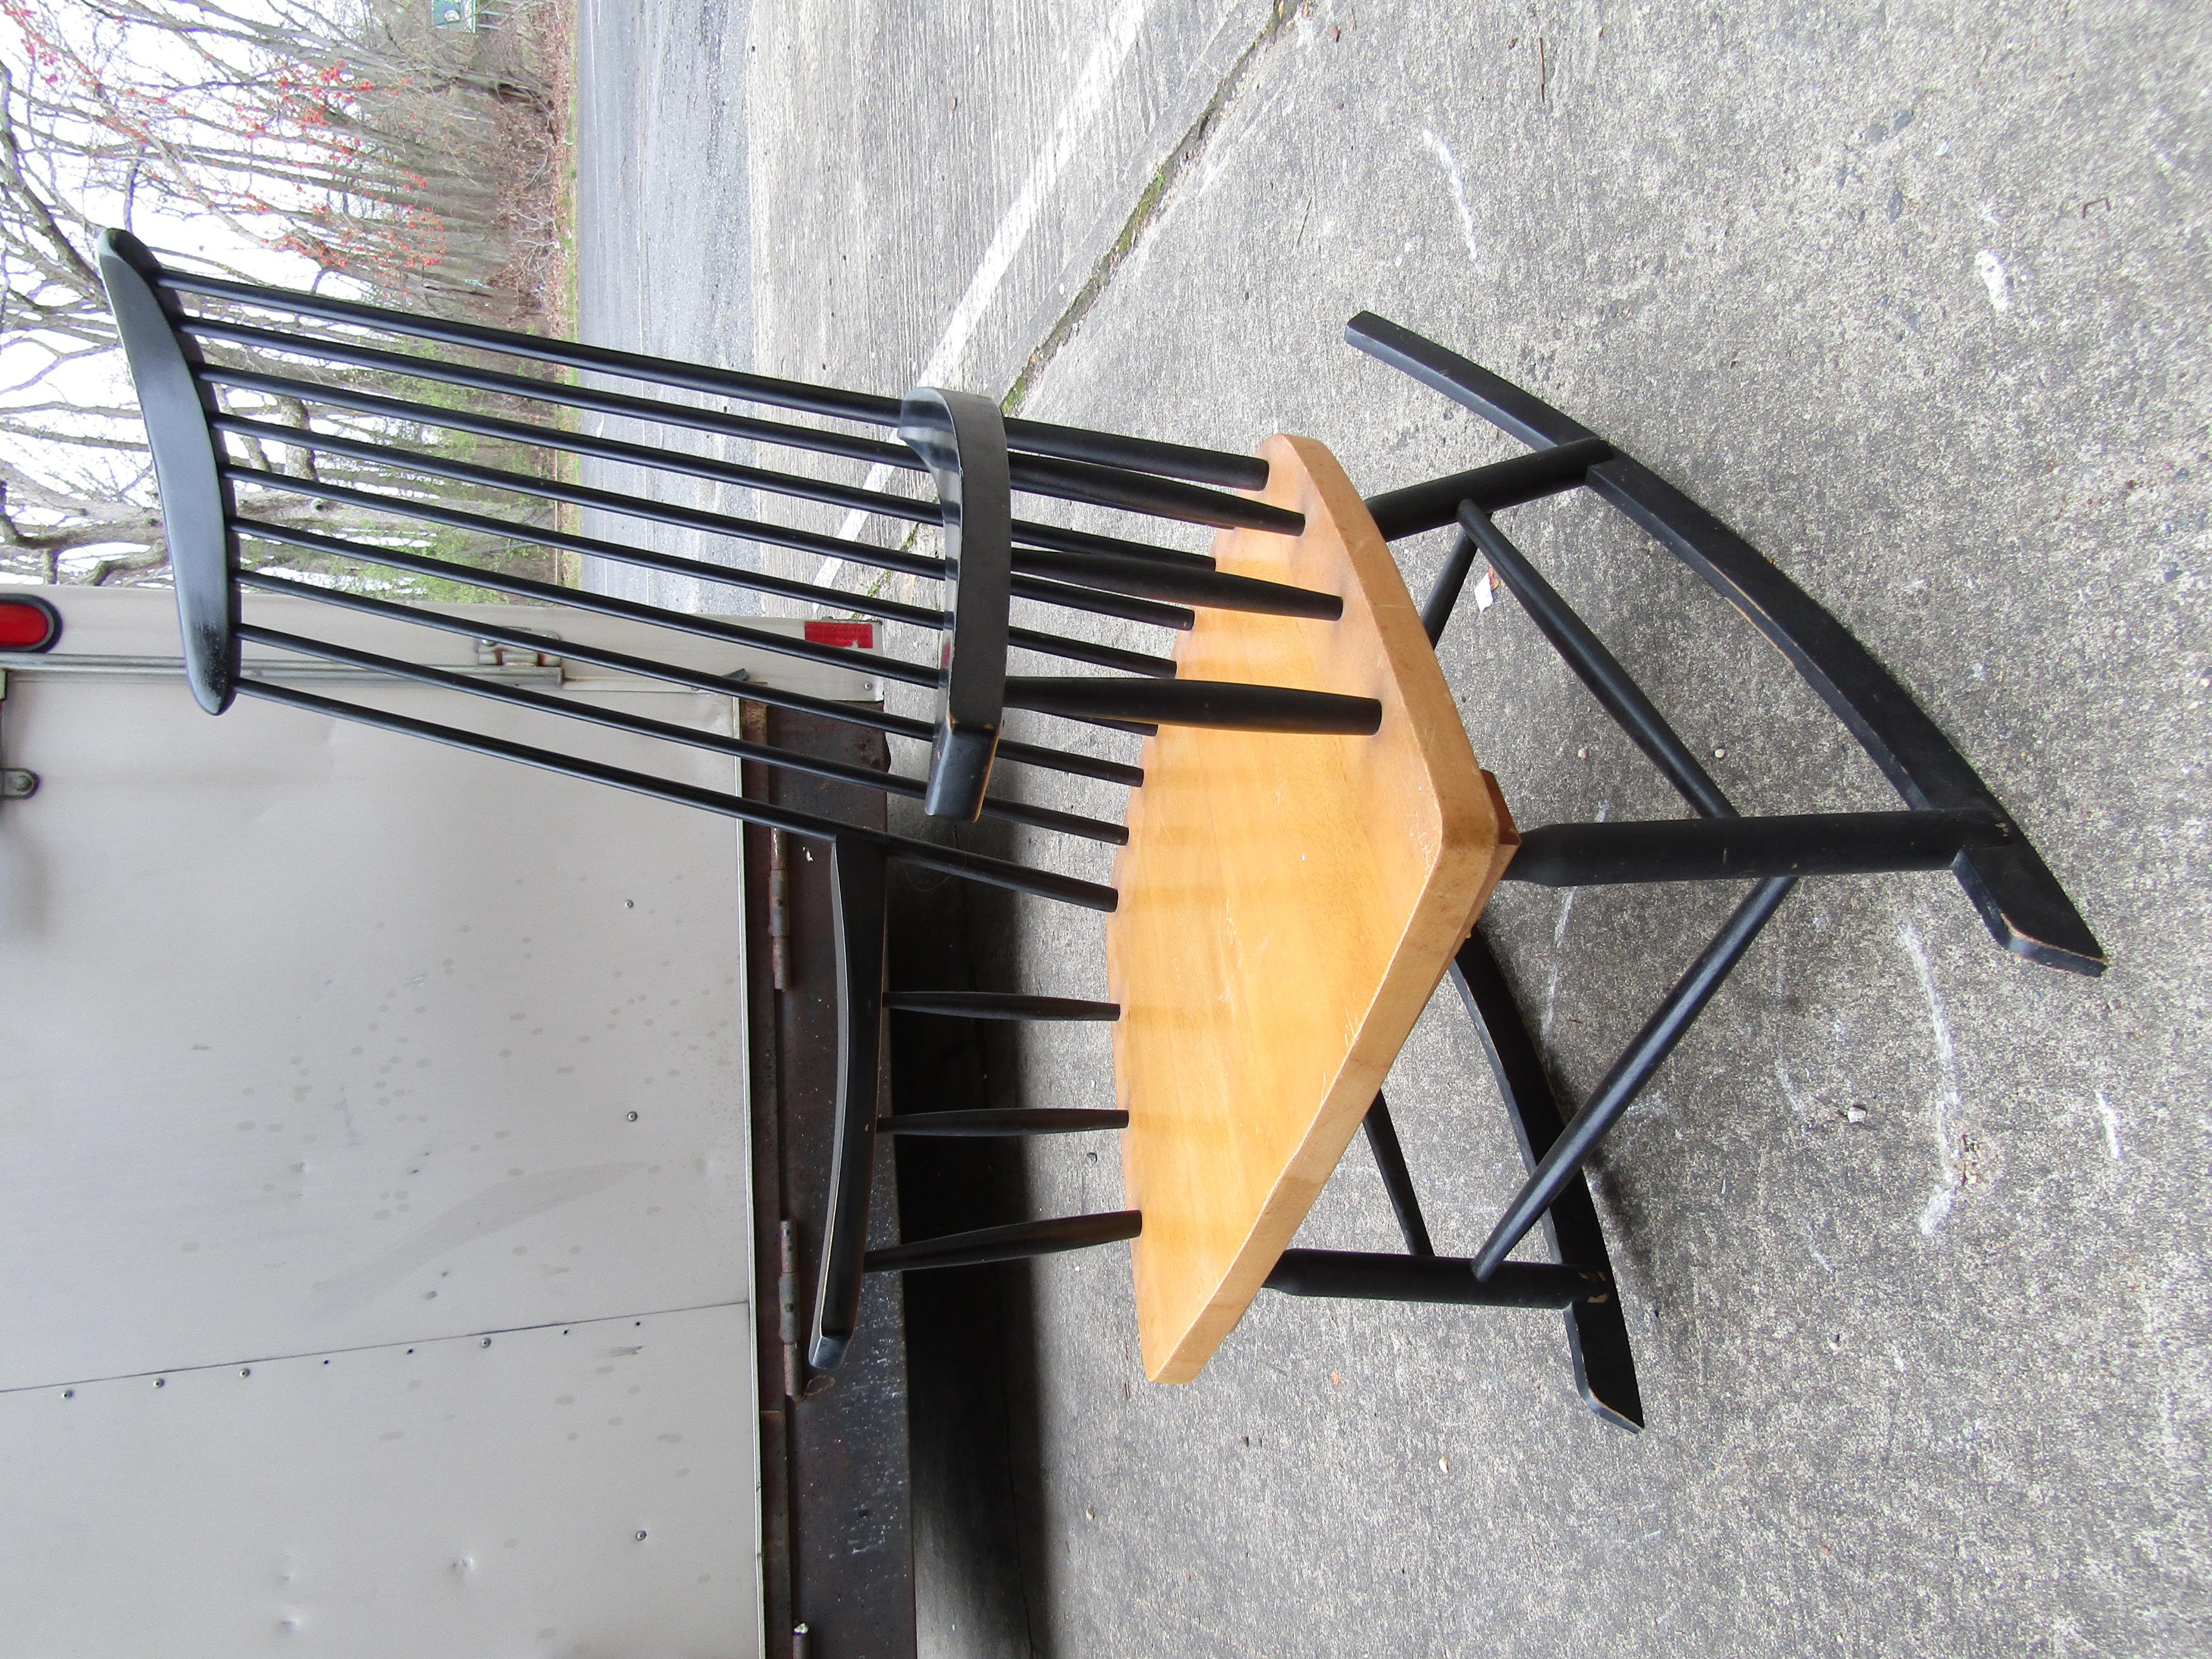 Mid-Century Modern stylish rocking chair featured in an ebonized frame, slatted back and maple finished seat.

(Please confirm item location - NY or NJ - with dealer).